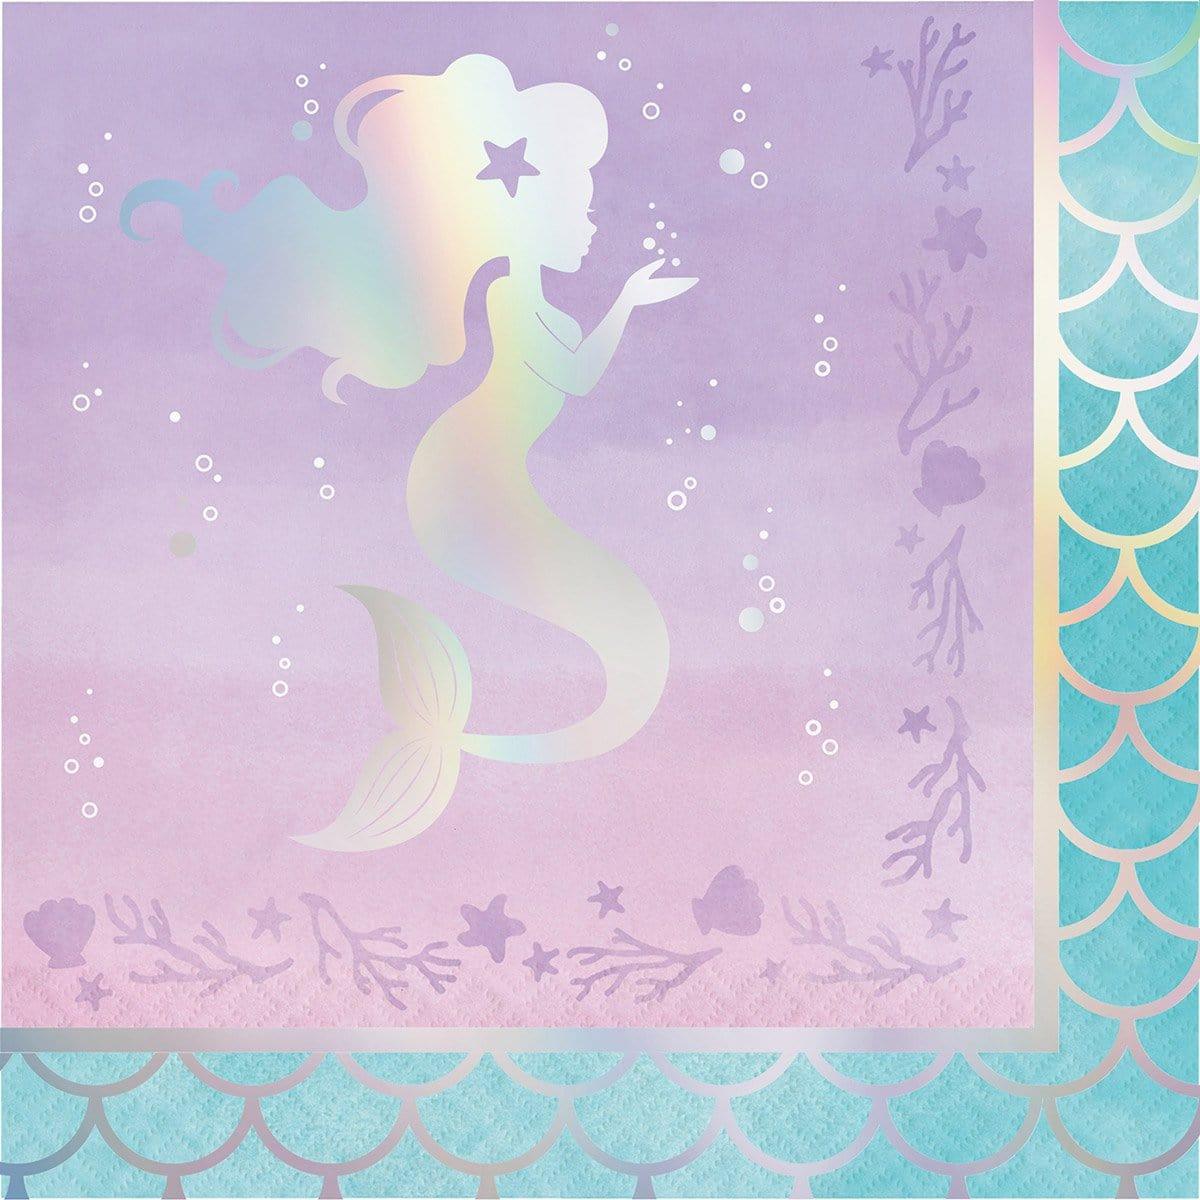 Buy Kids Birthday Mermaid Shine lunch napkins, 16 per package sold at Party Expert